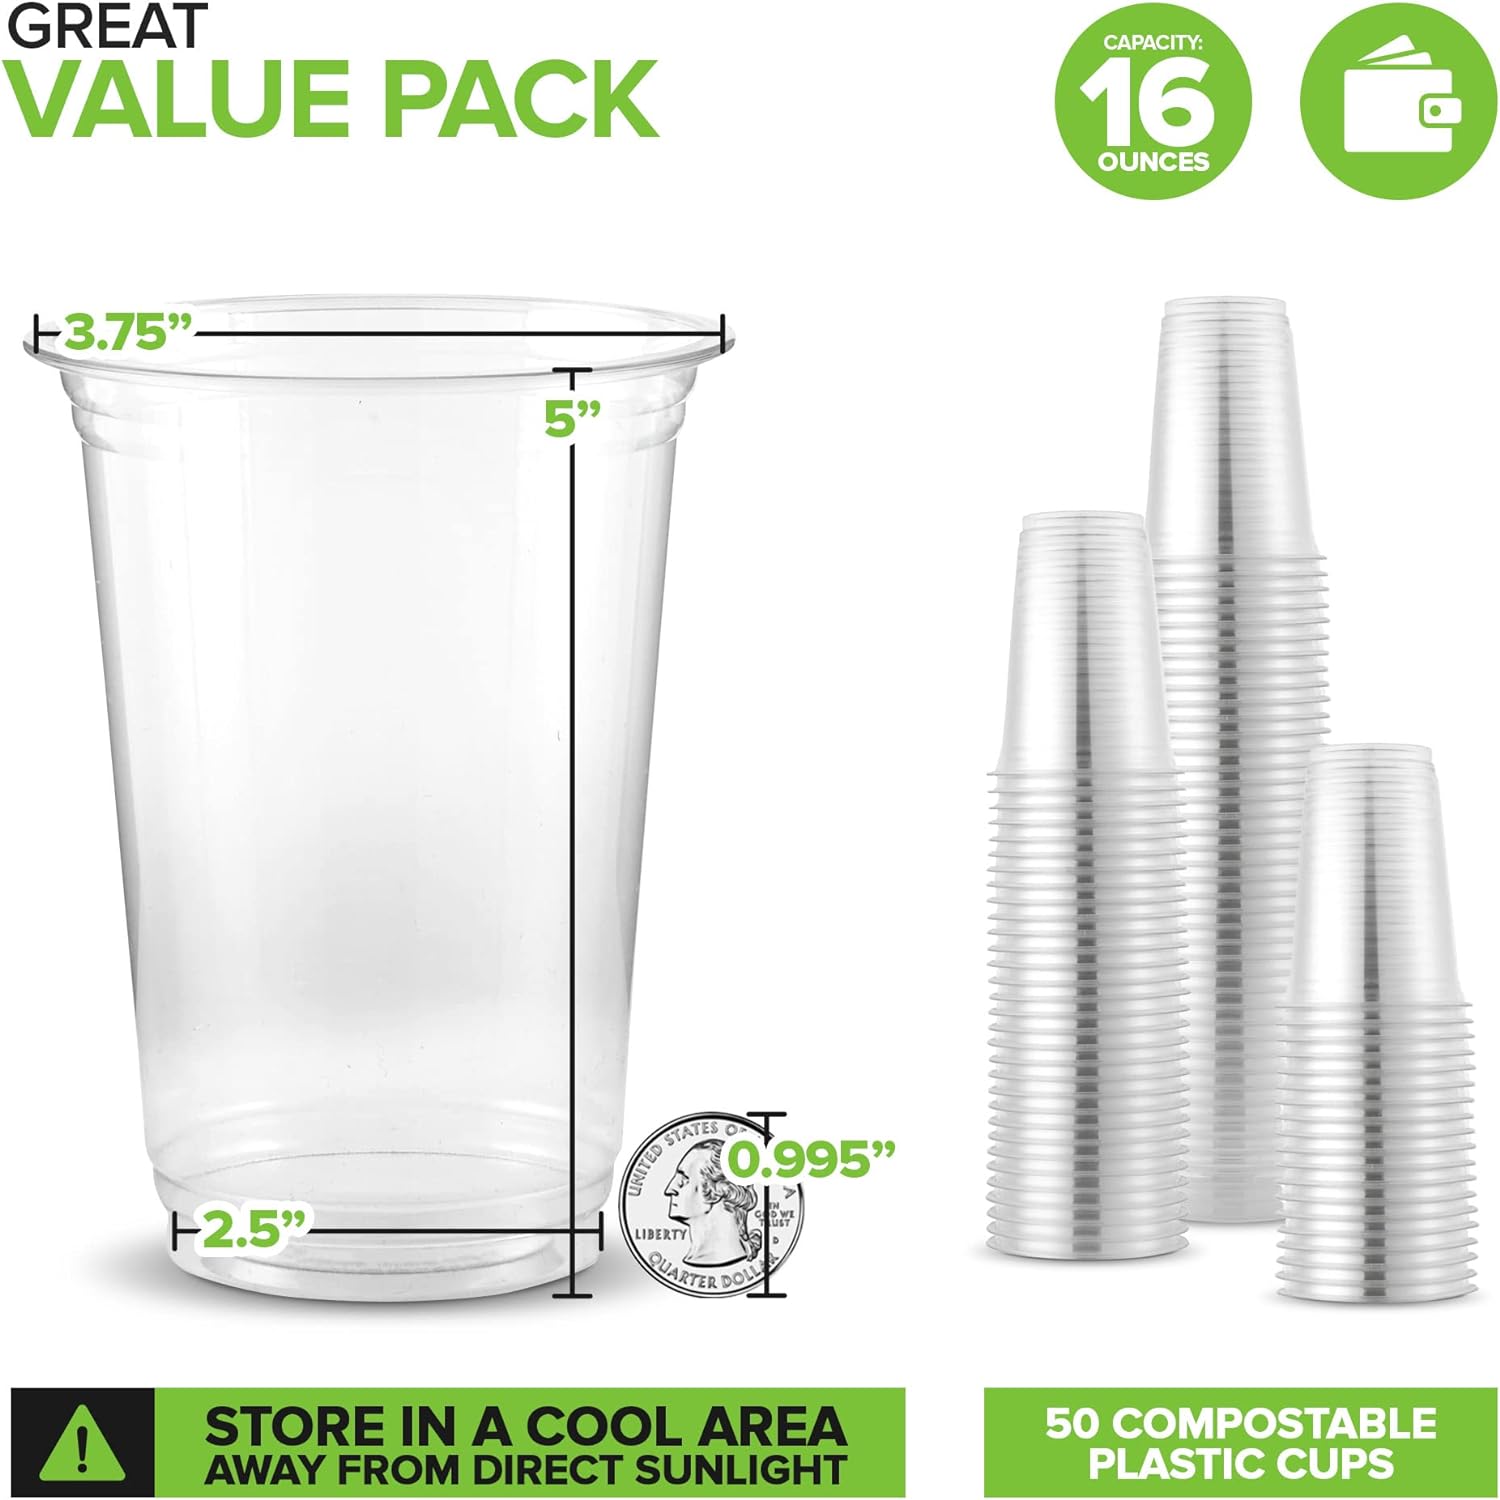 Stock Your Home 16 oz Clear Compostable Cold Cups Review